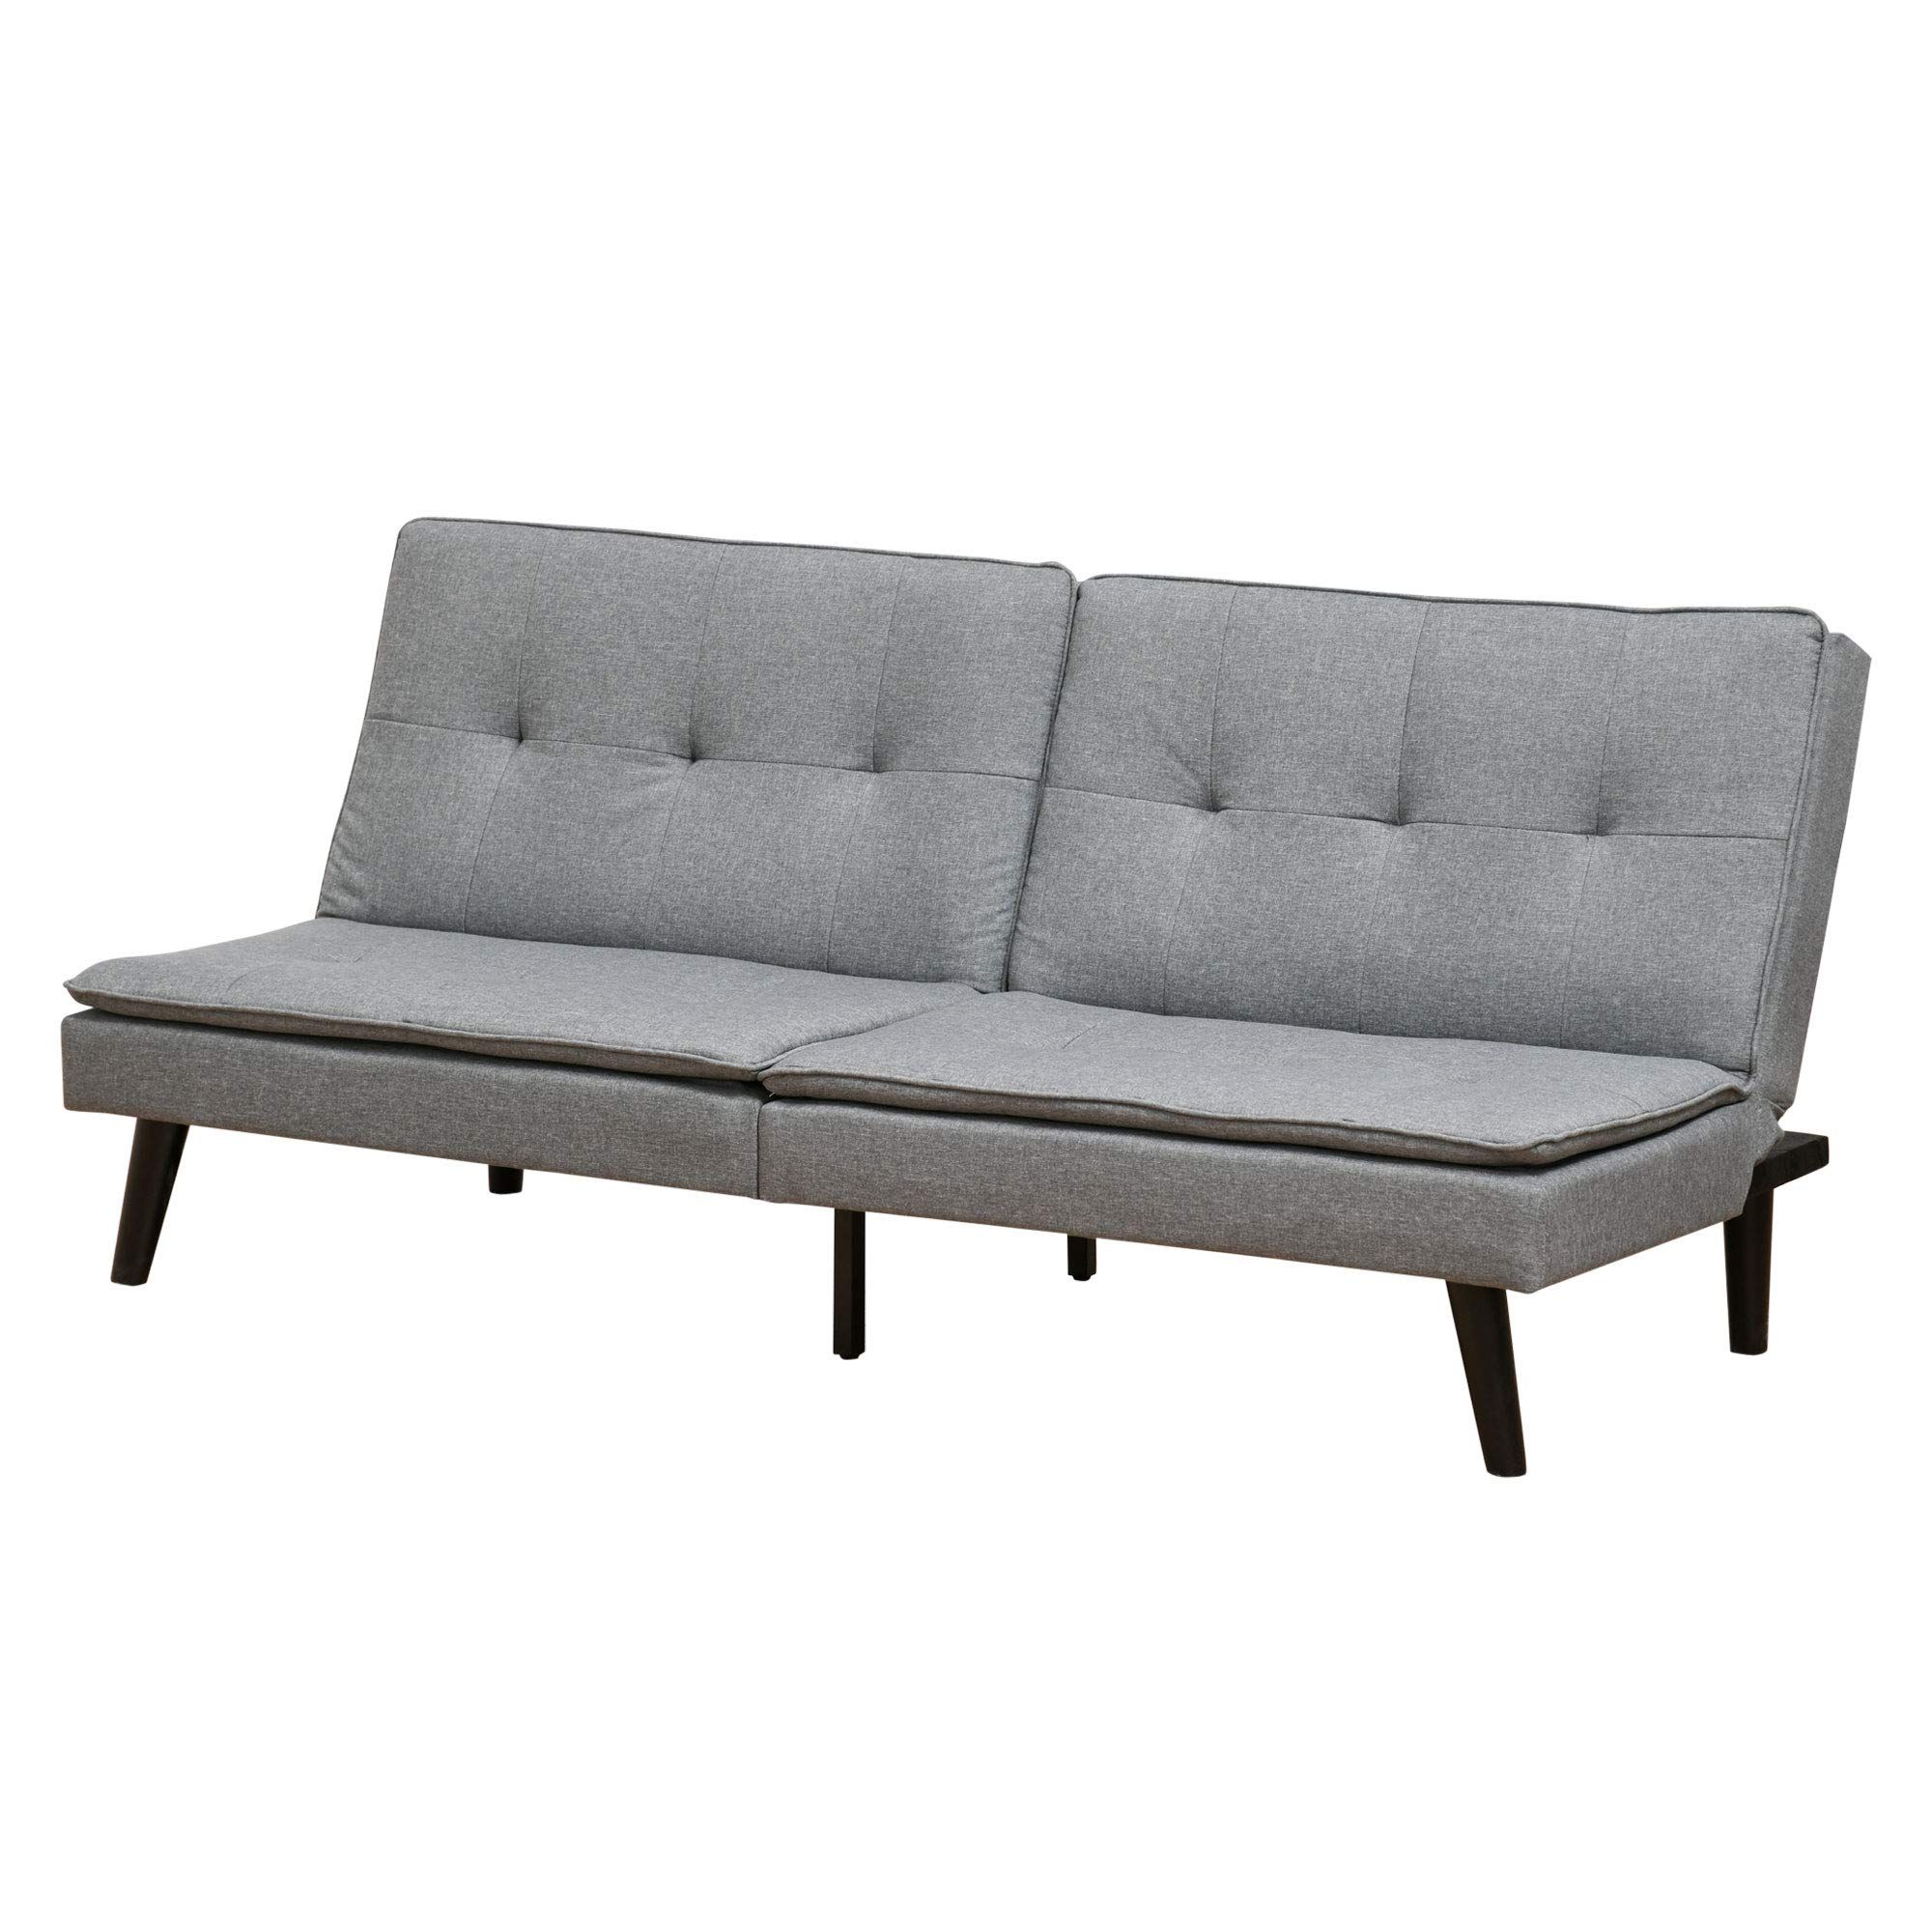 Most Recently Released Adjustable Backrest Futon Sofa Beds Intended For Buy Homcom Convertible Lounge Futon Sofa Bed Tufted Fabric Upholstered (Photo 11 of 15)